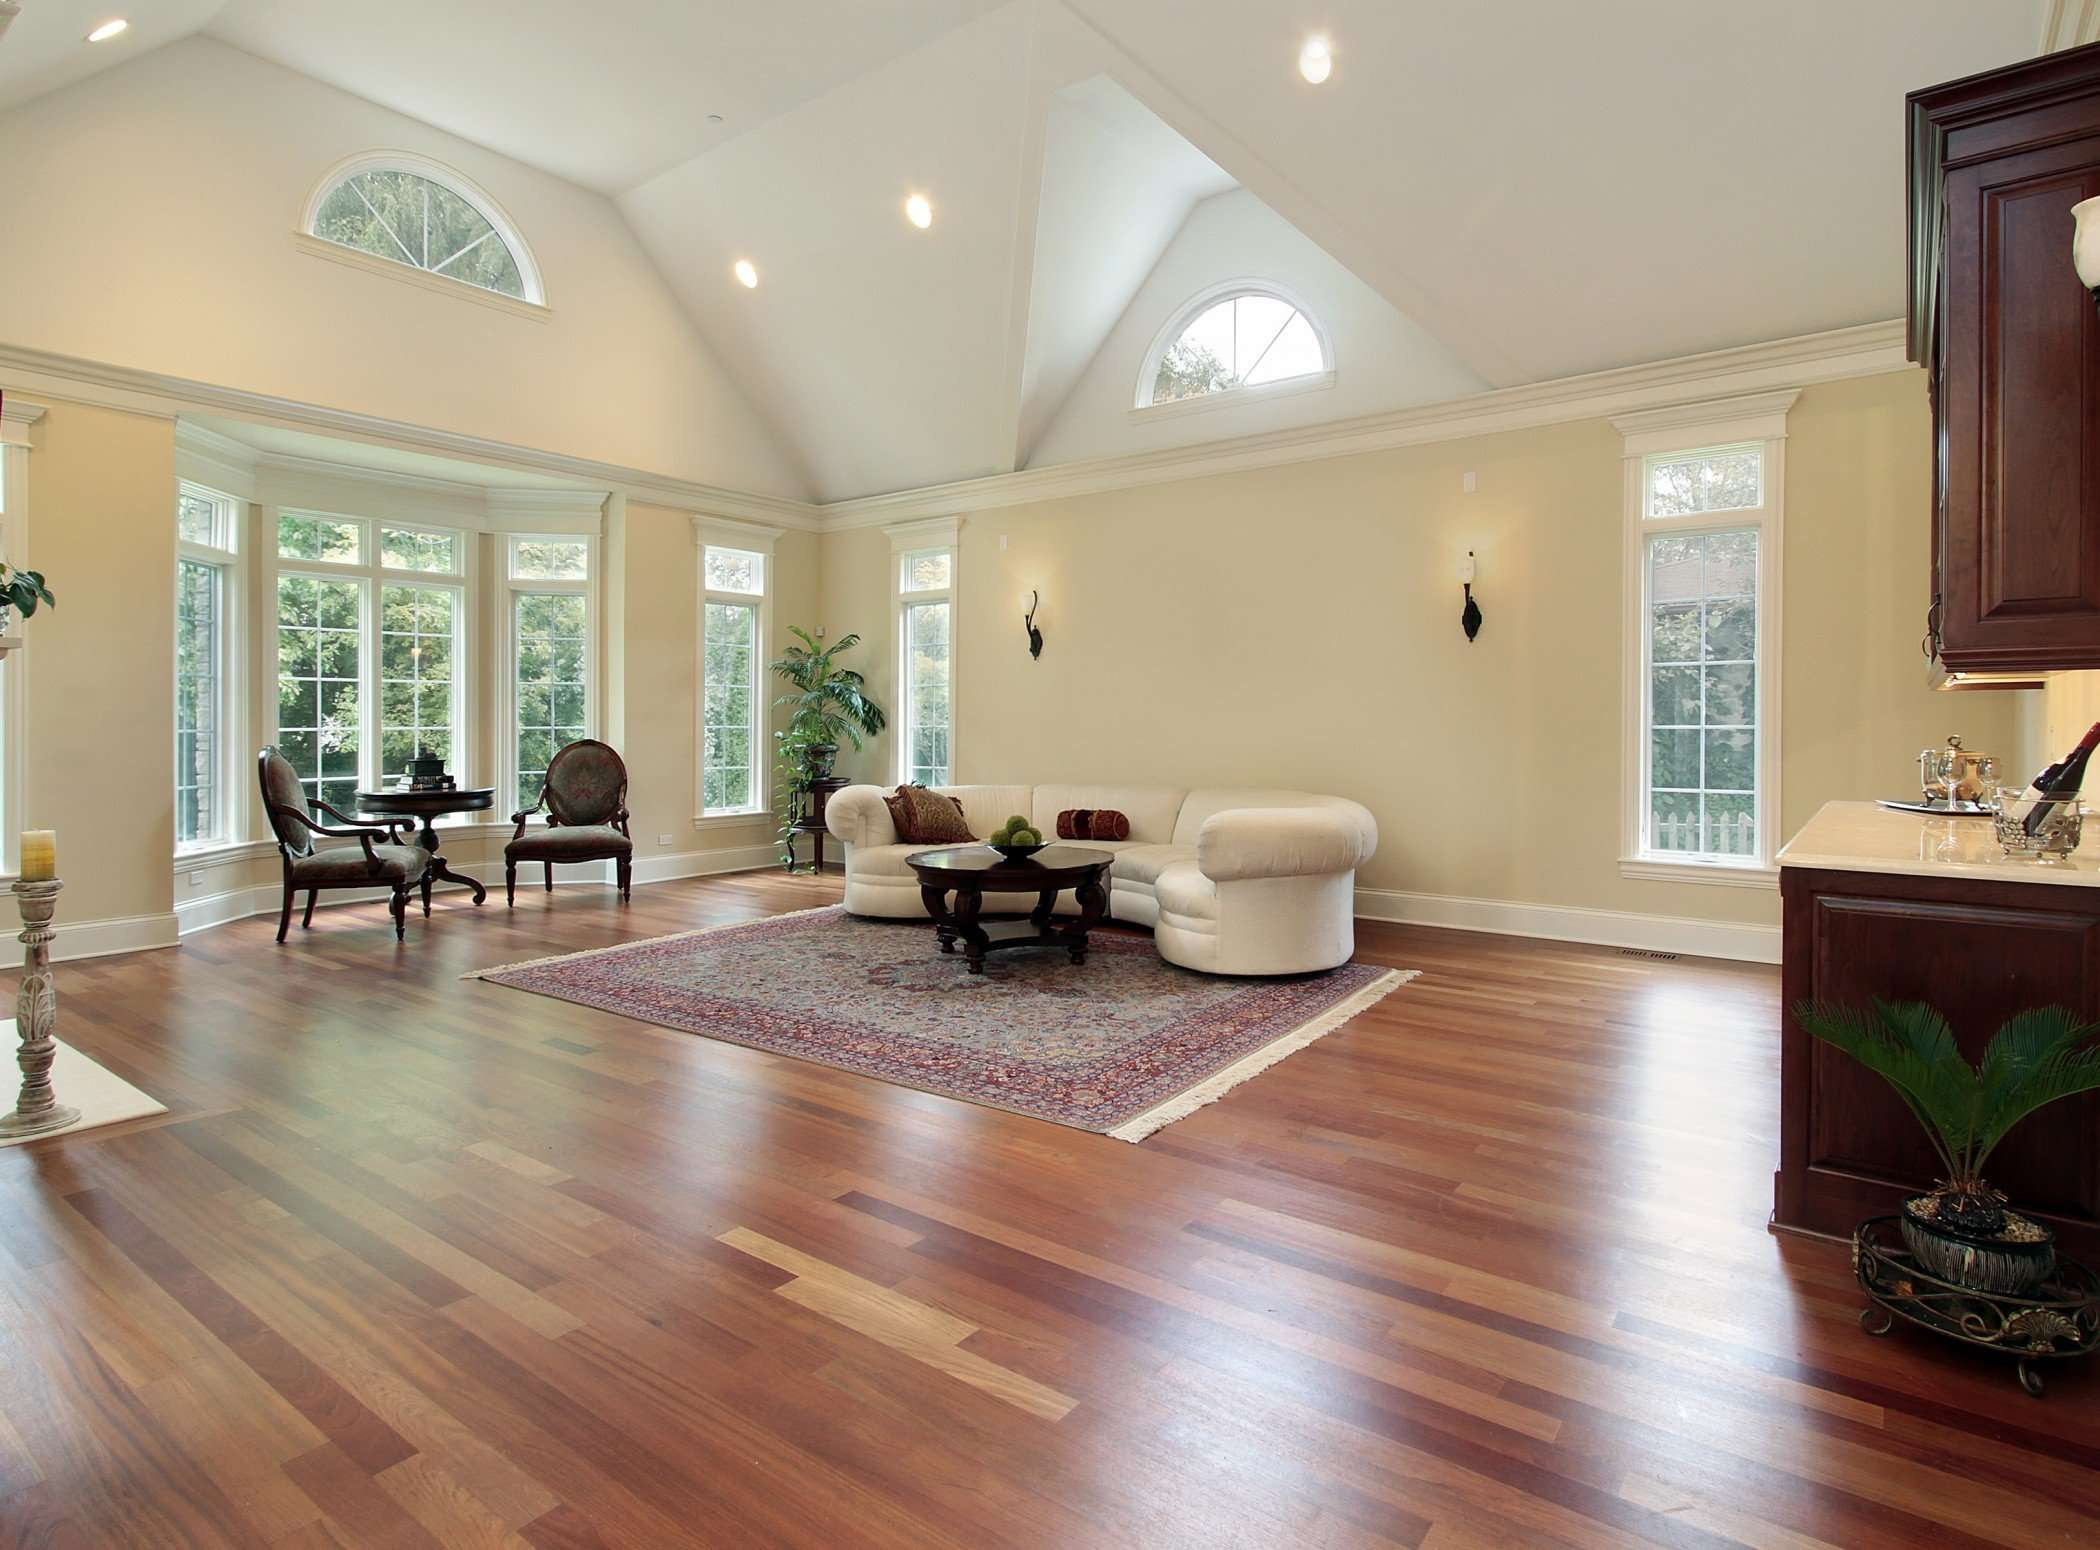 14 Recommended Cost to Install Oak Hardwood Floors 2024 free download cost to install oak hardwood floors of wood floor price lists a1 wood floors intended for perths largest range of wood floors